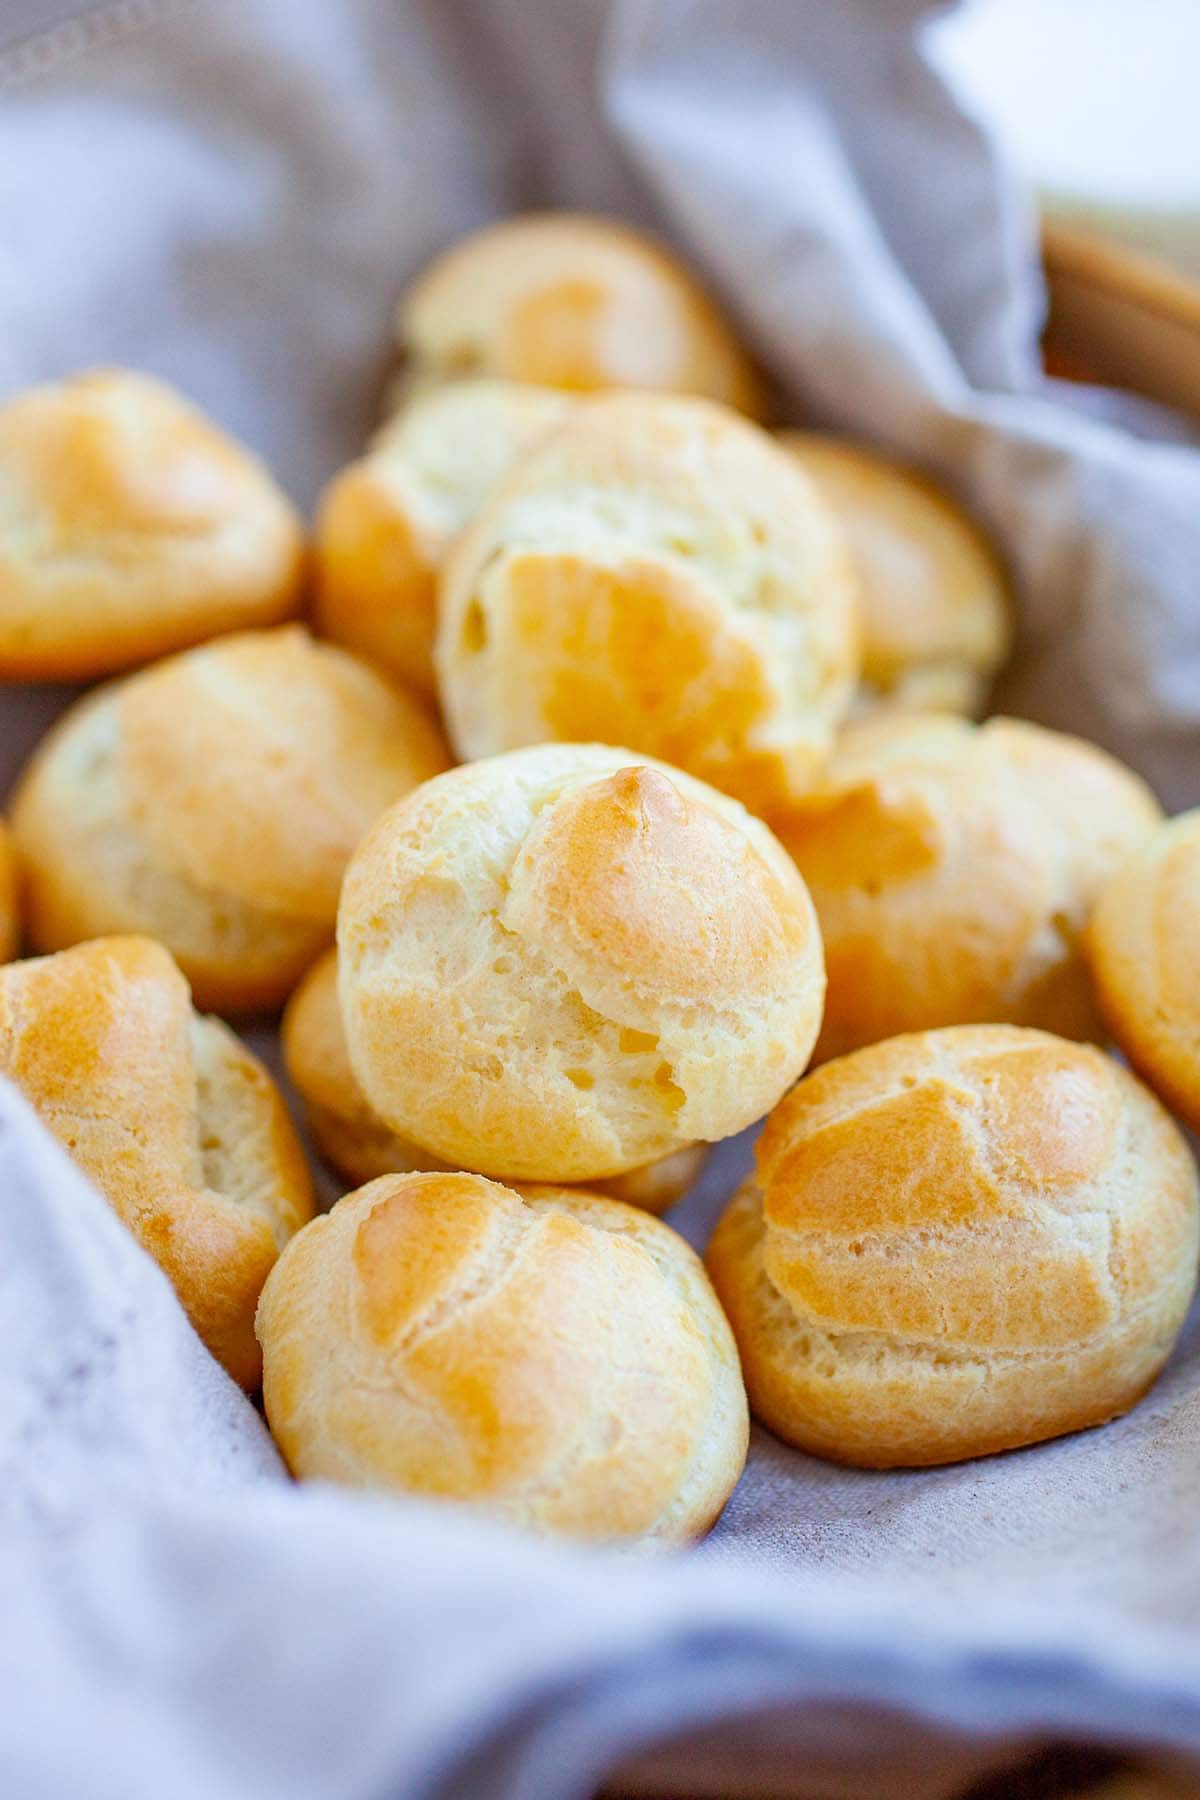 Choux pastry recipe with ingredients of butter, water, salt, flour and eggs.